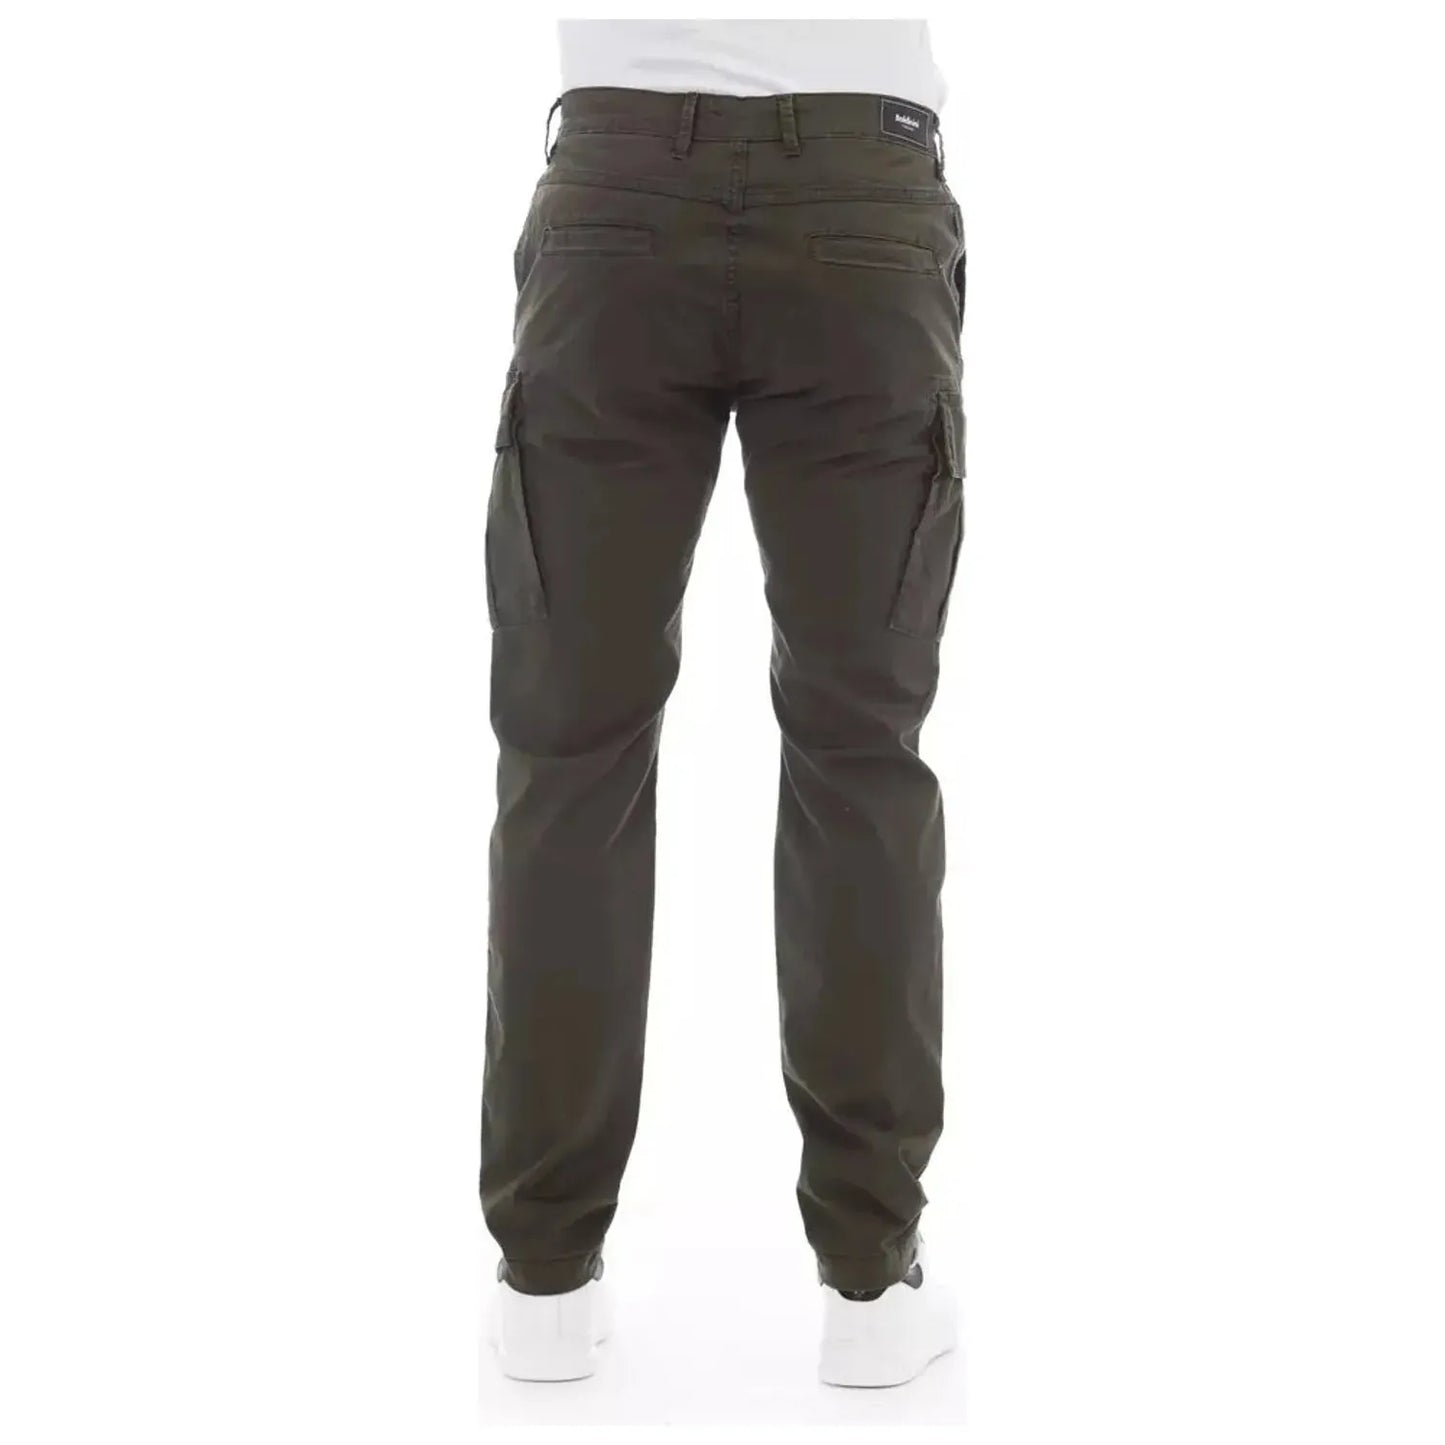 Baldinini Trend Chic Army Cargo Trousers for Men army-cotton-jeans-pant-4 product-23134-451107924-18-5d3a4d1a-60b.webp